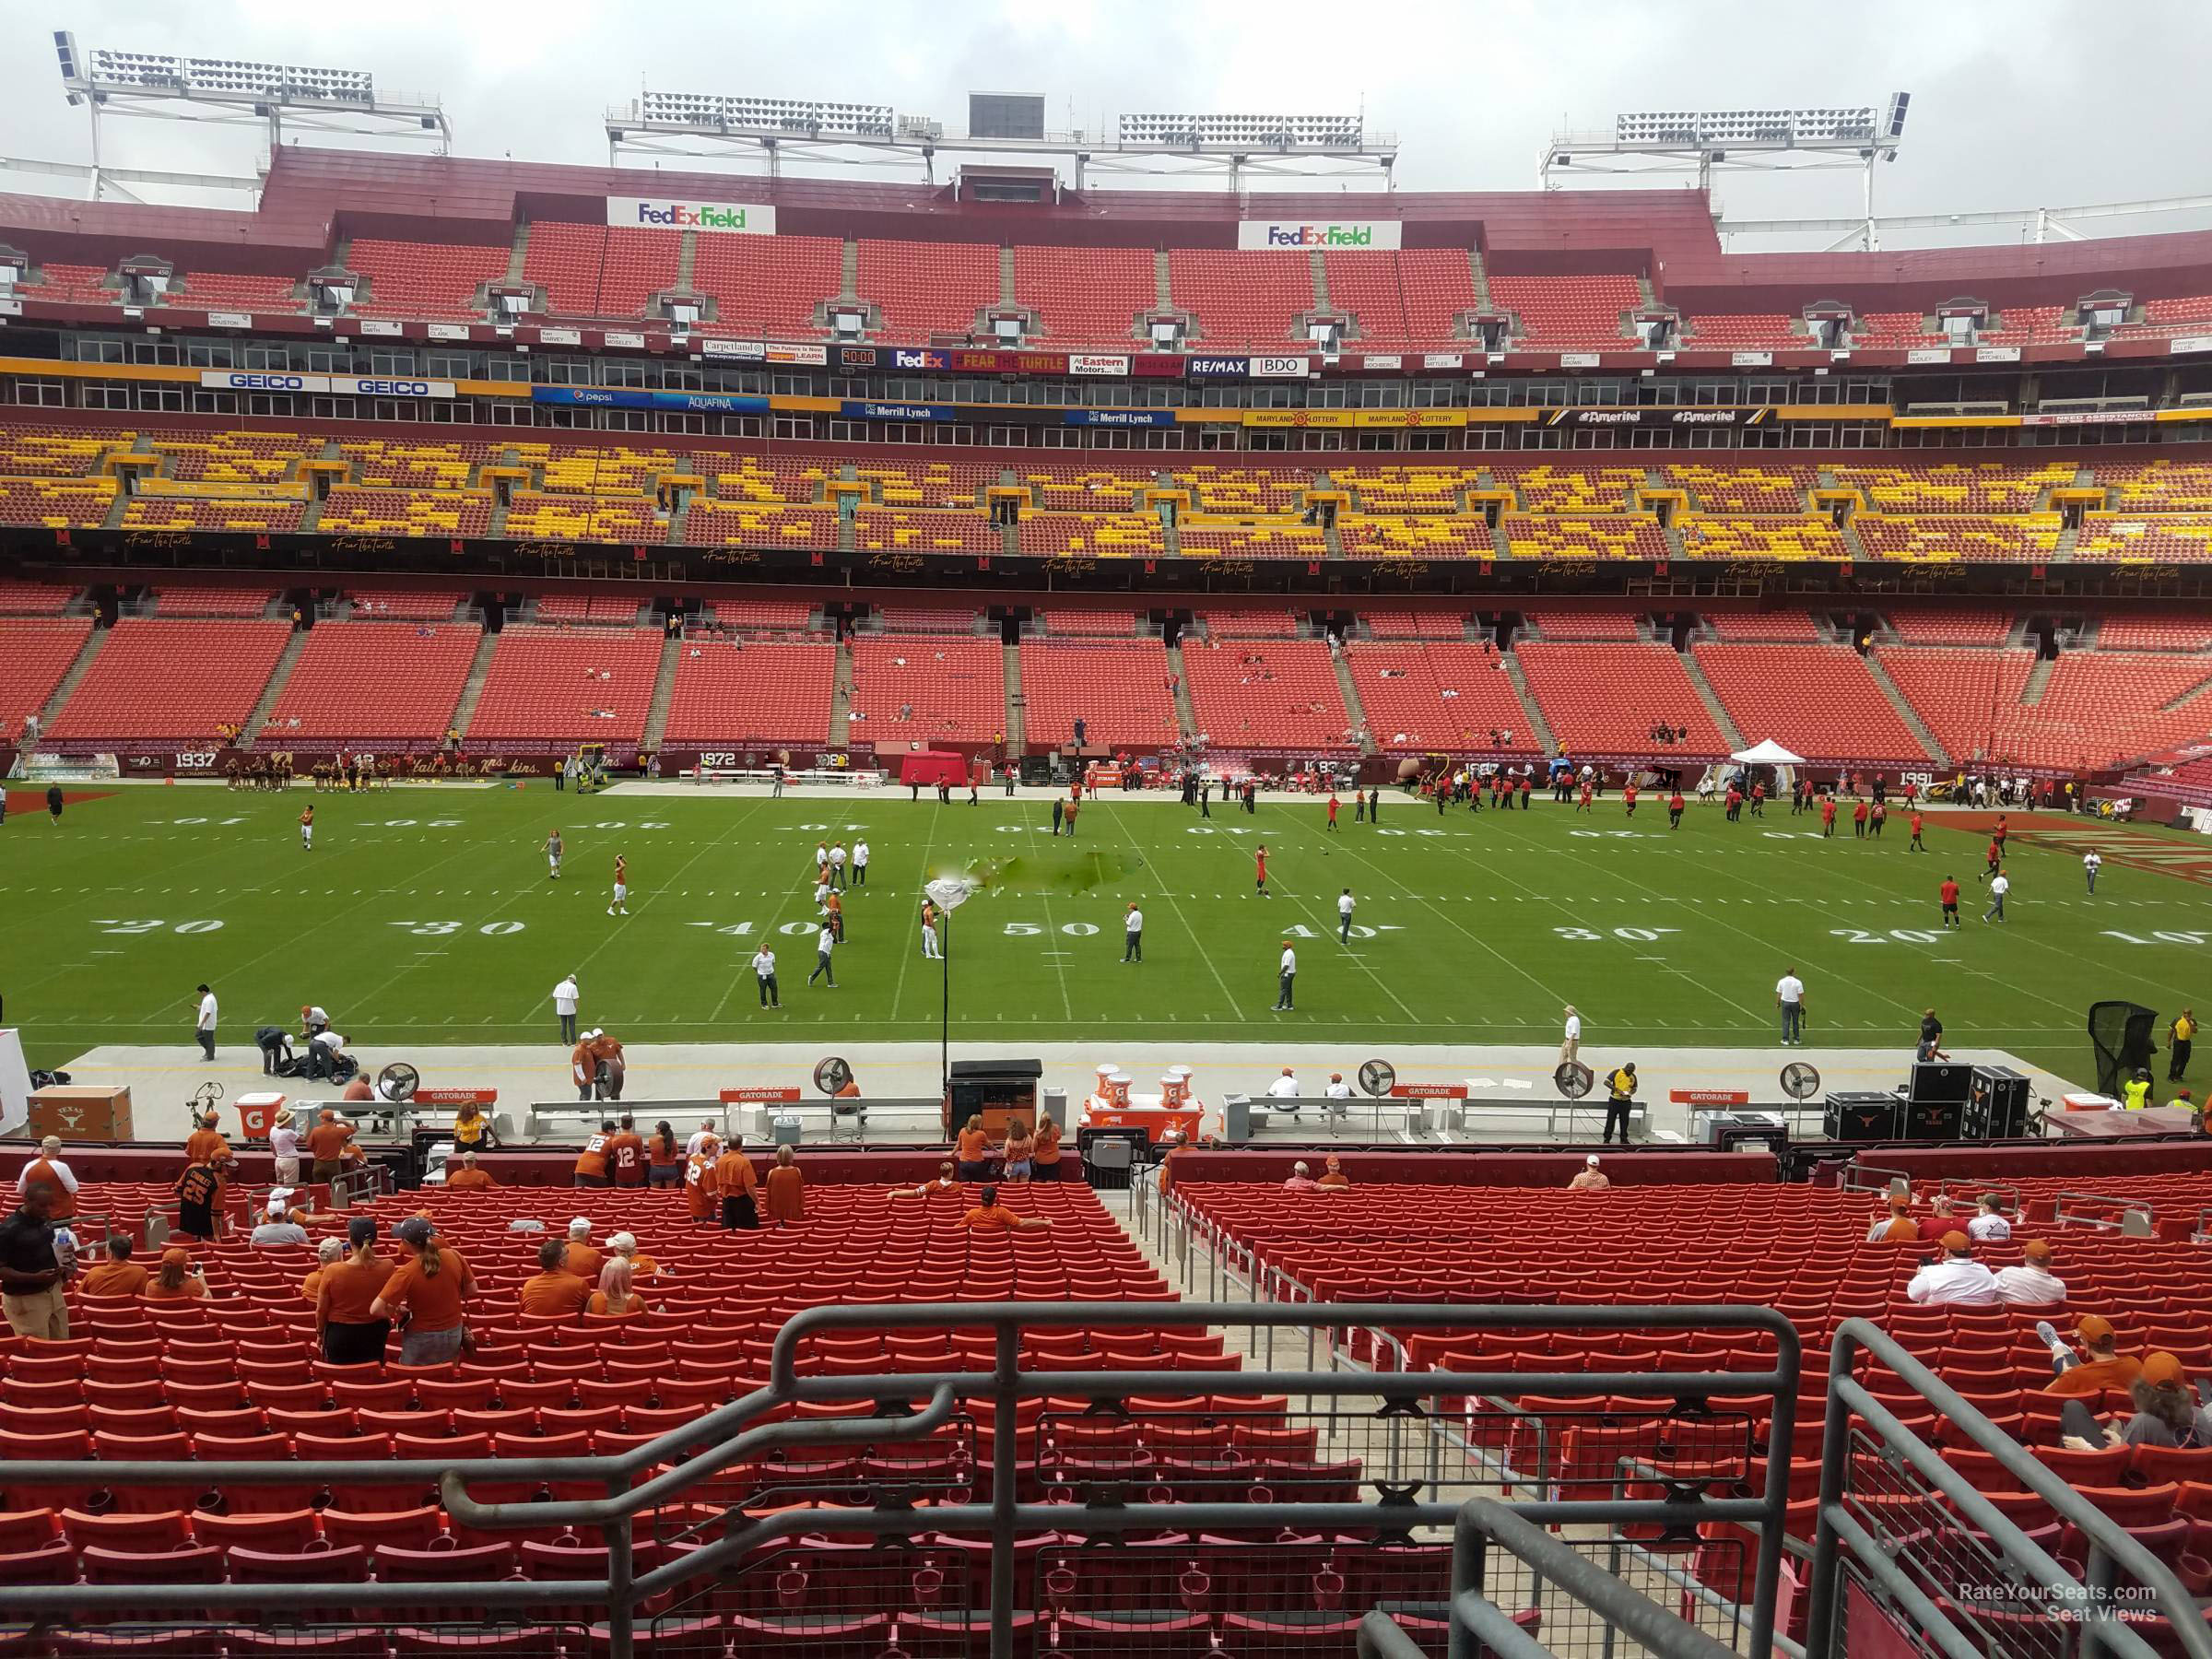 section 222, row 4 seat view  - fedexfield